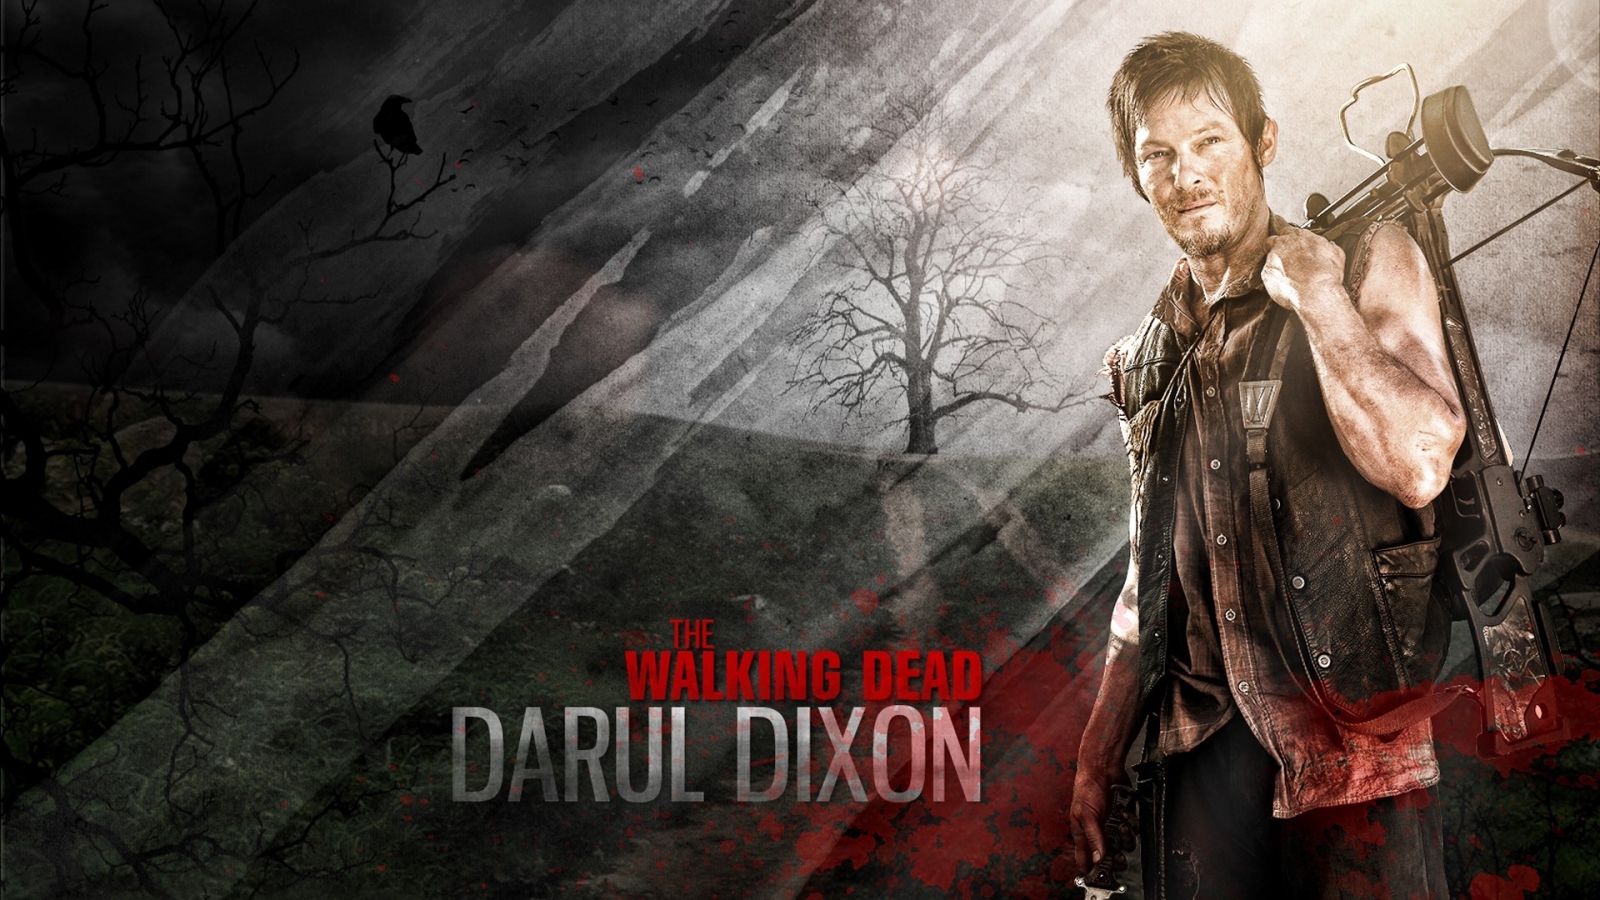 The Walking Dead Daryl Dixon for 1600 x 900 HDTV resolution